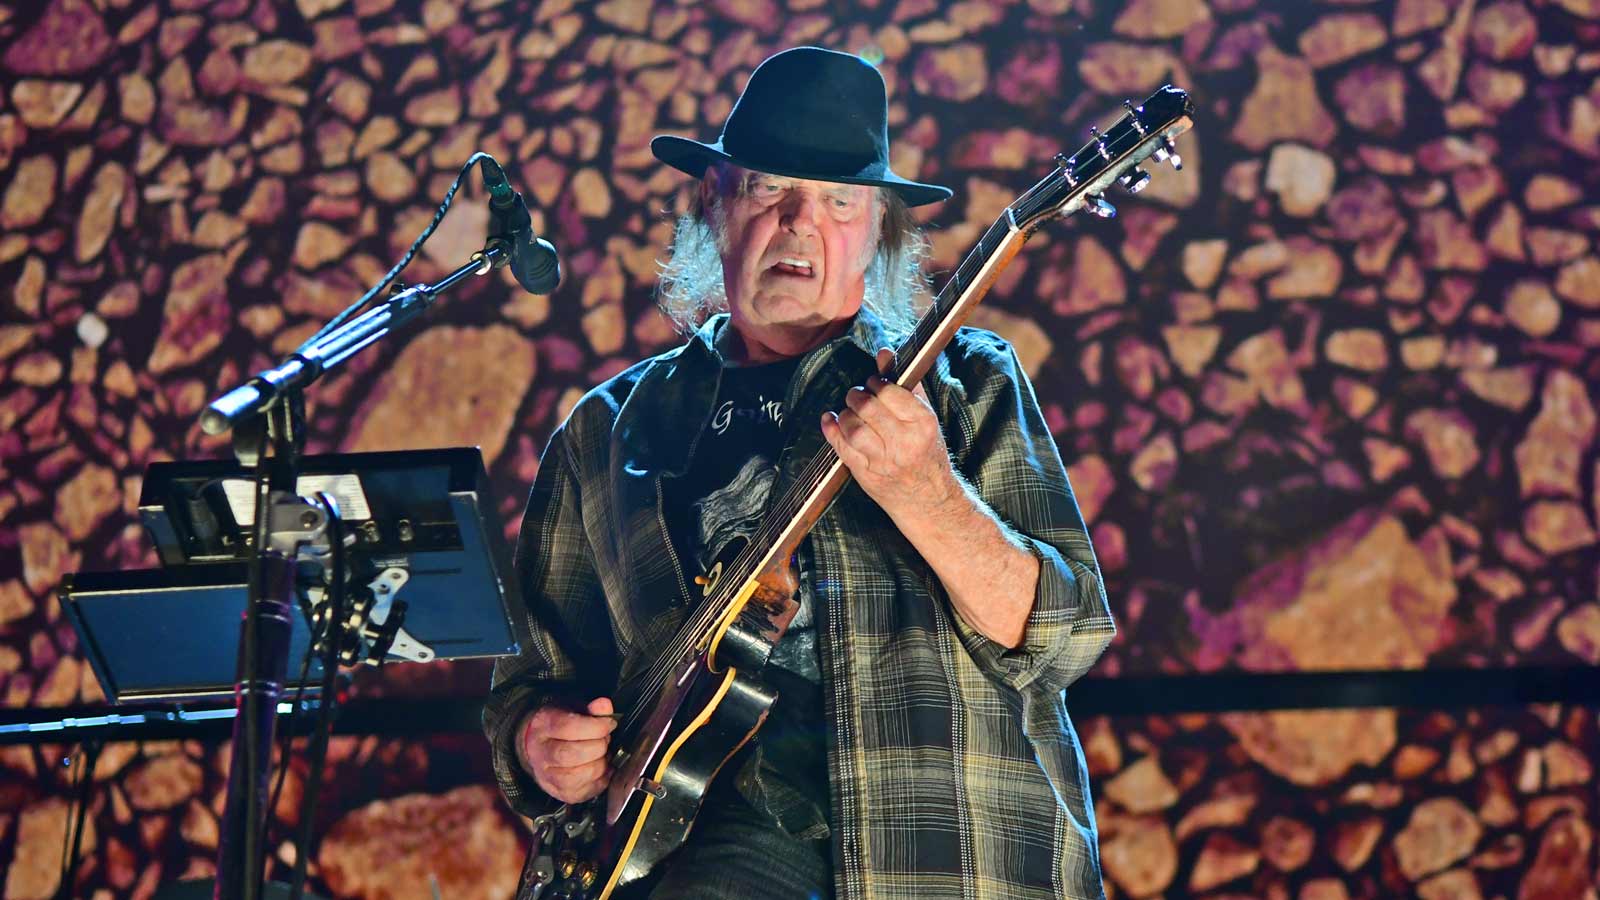 Legendary rocker Neil Young coming to Phoenix this spring with Crazy Horse